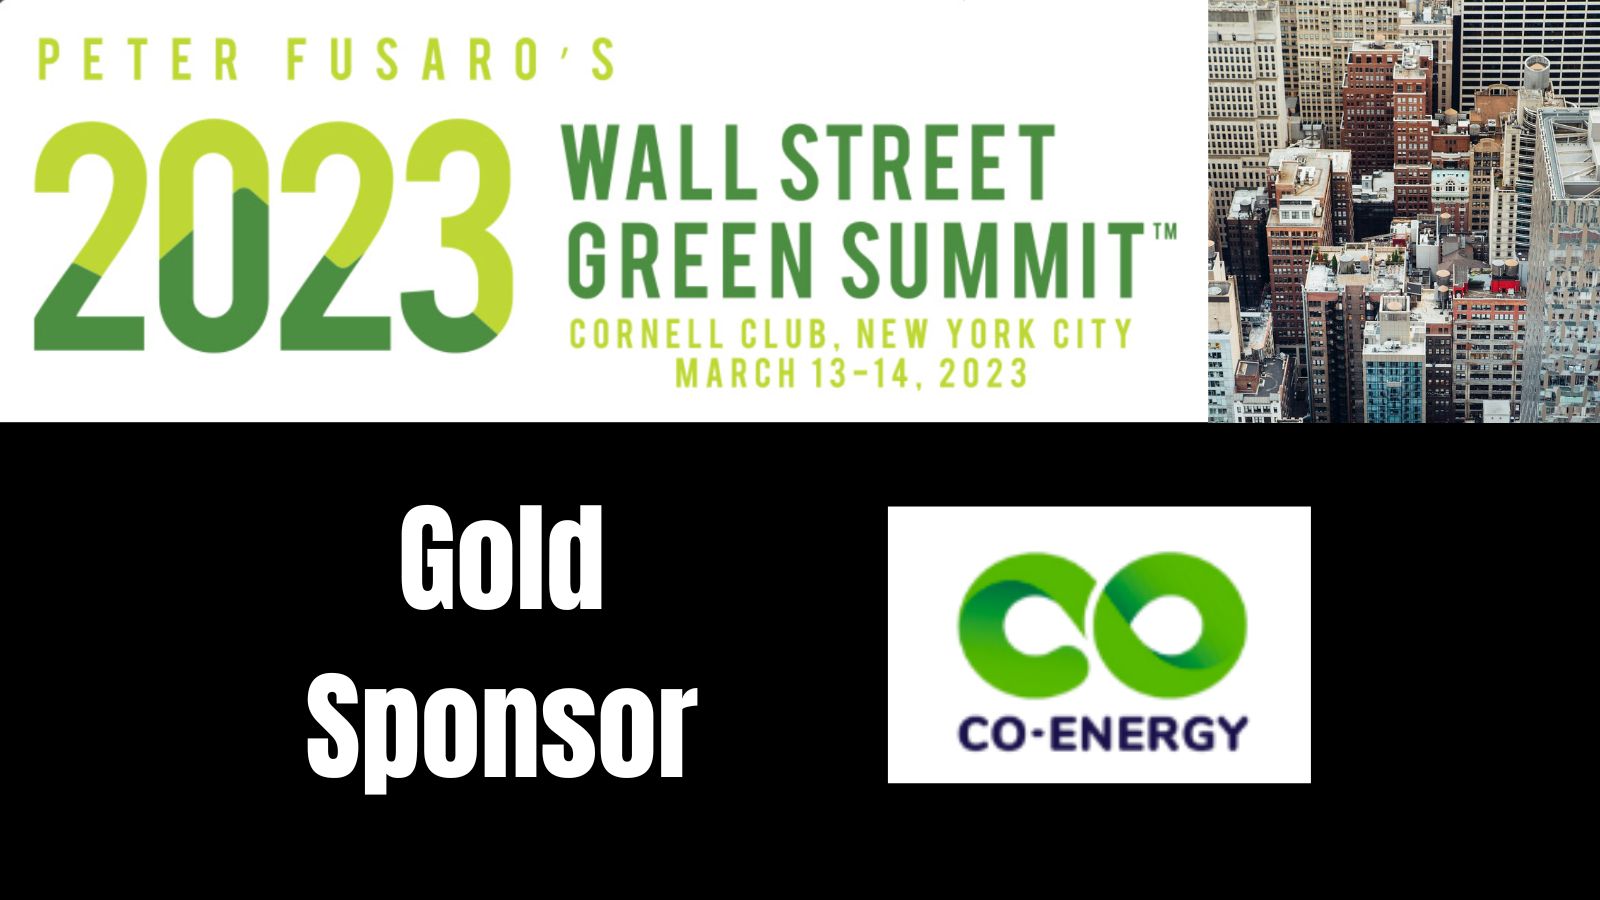 Co-Energy Sponsors The Wall Street Green Summit